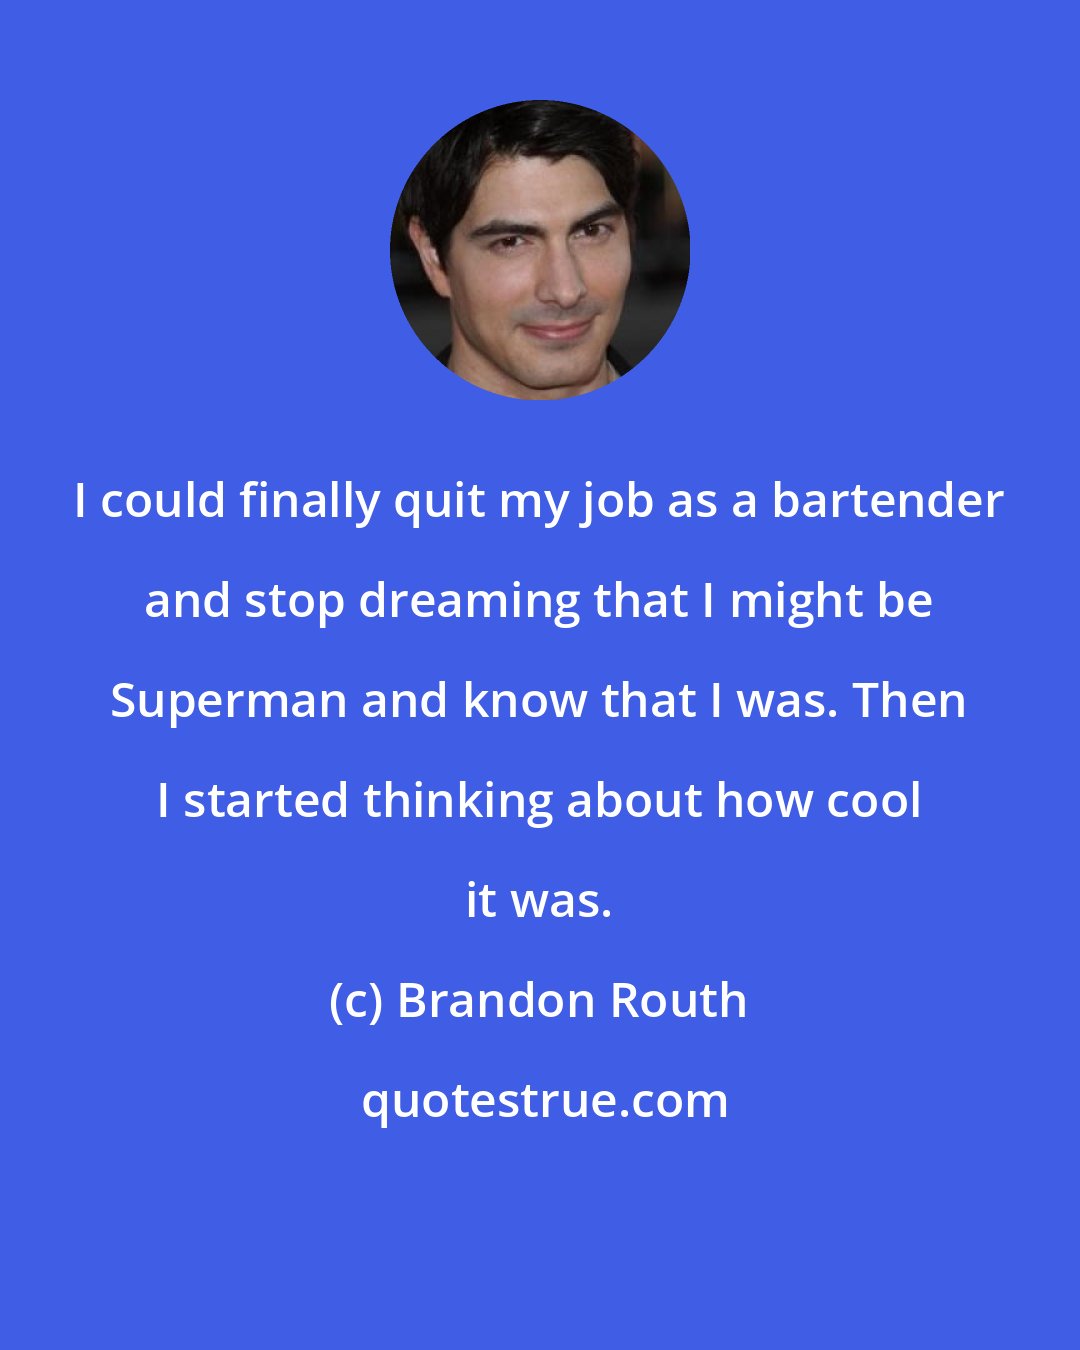 Brandon Routh: I could finally quit my job as a bartender and stop dreaming that I might be Superman and know that I was. Then I started thinking about how cool it was.